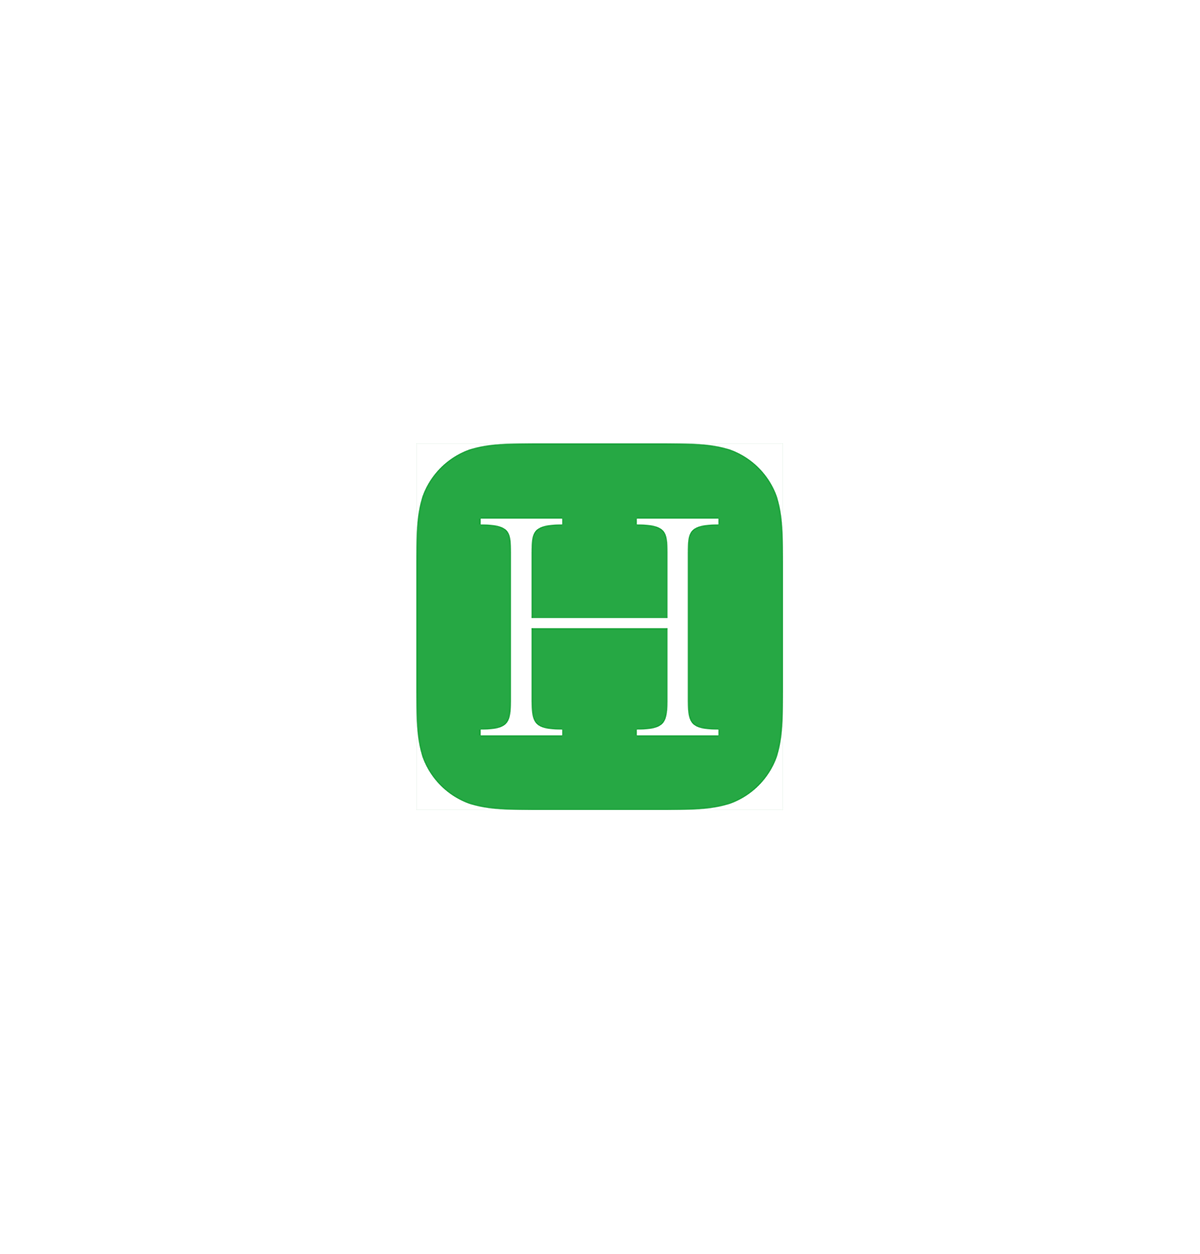 Huff Post Huffington Post iphone app redesign ios8 iphone news user interface mobile design